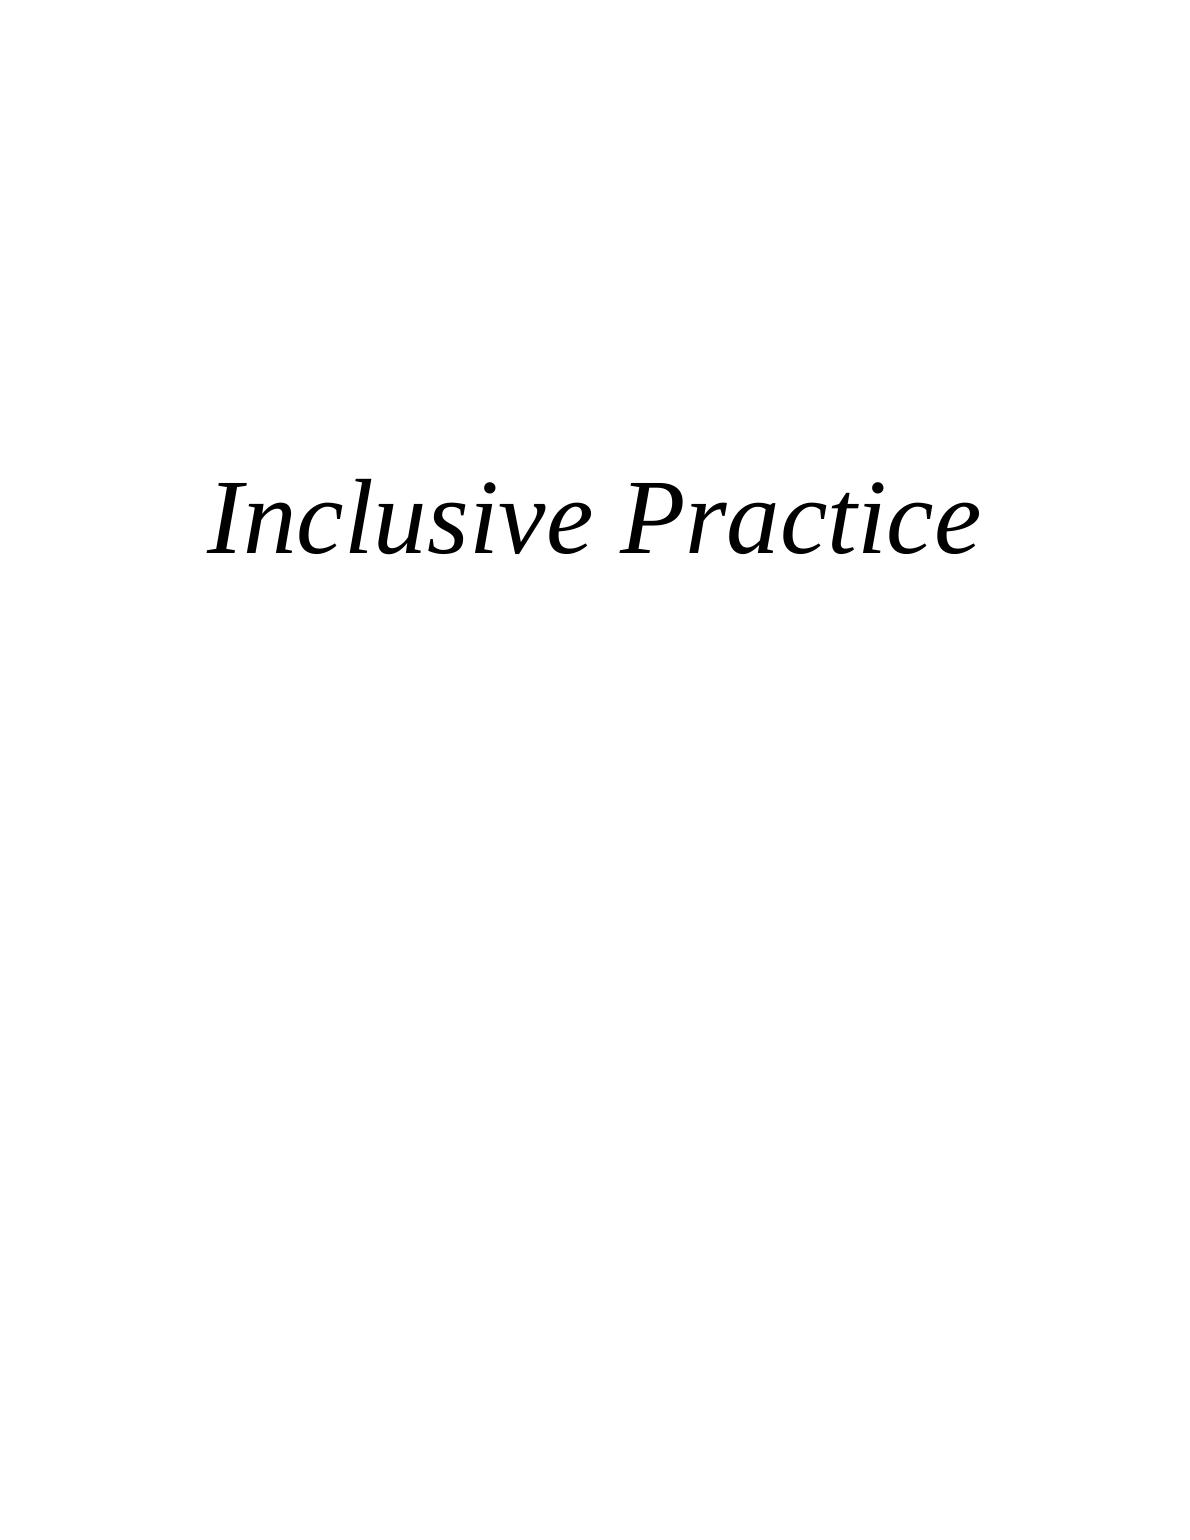 Inclusive Practice: Impacts, Policies, and Strategies_1